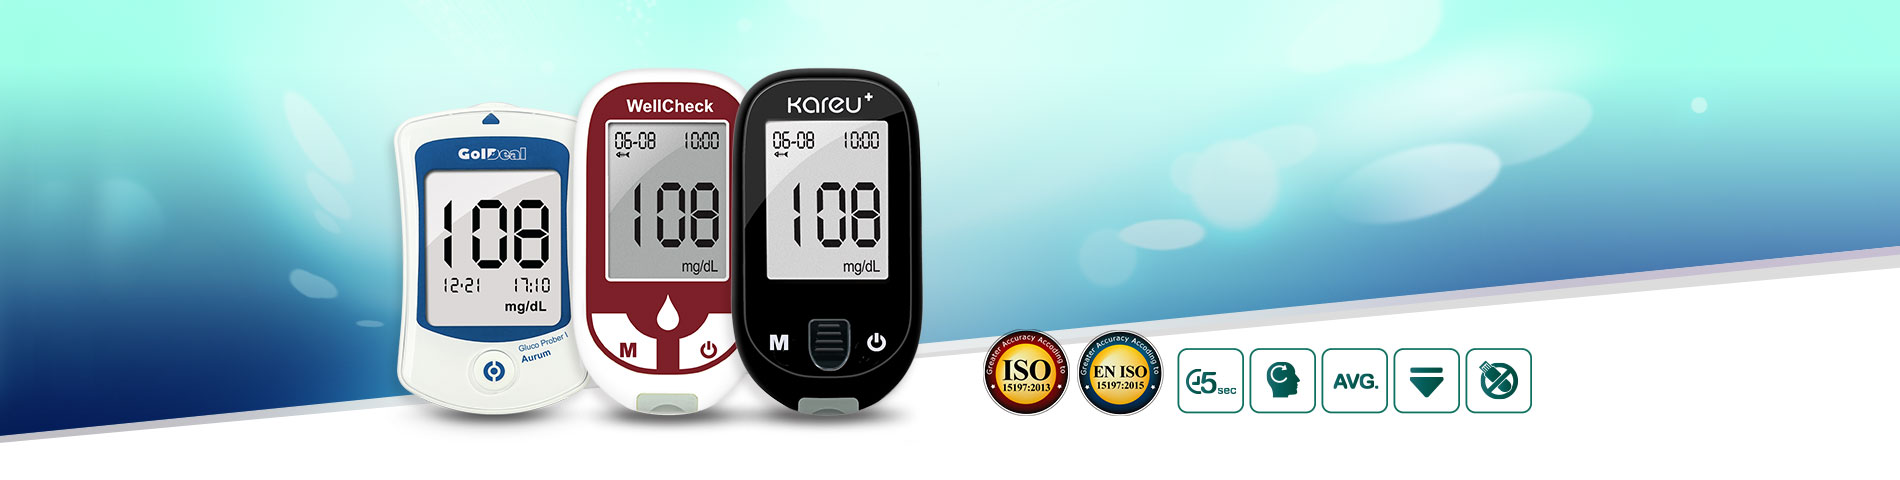 Quick Reaction & High Accuracy Blood Glucose Meter Monitor blood glucose levels on a regular basis